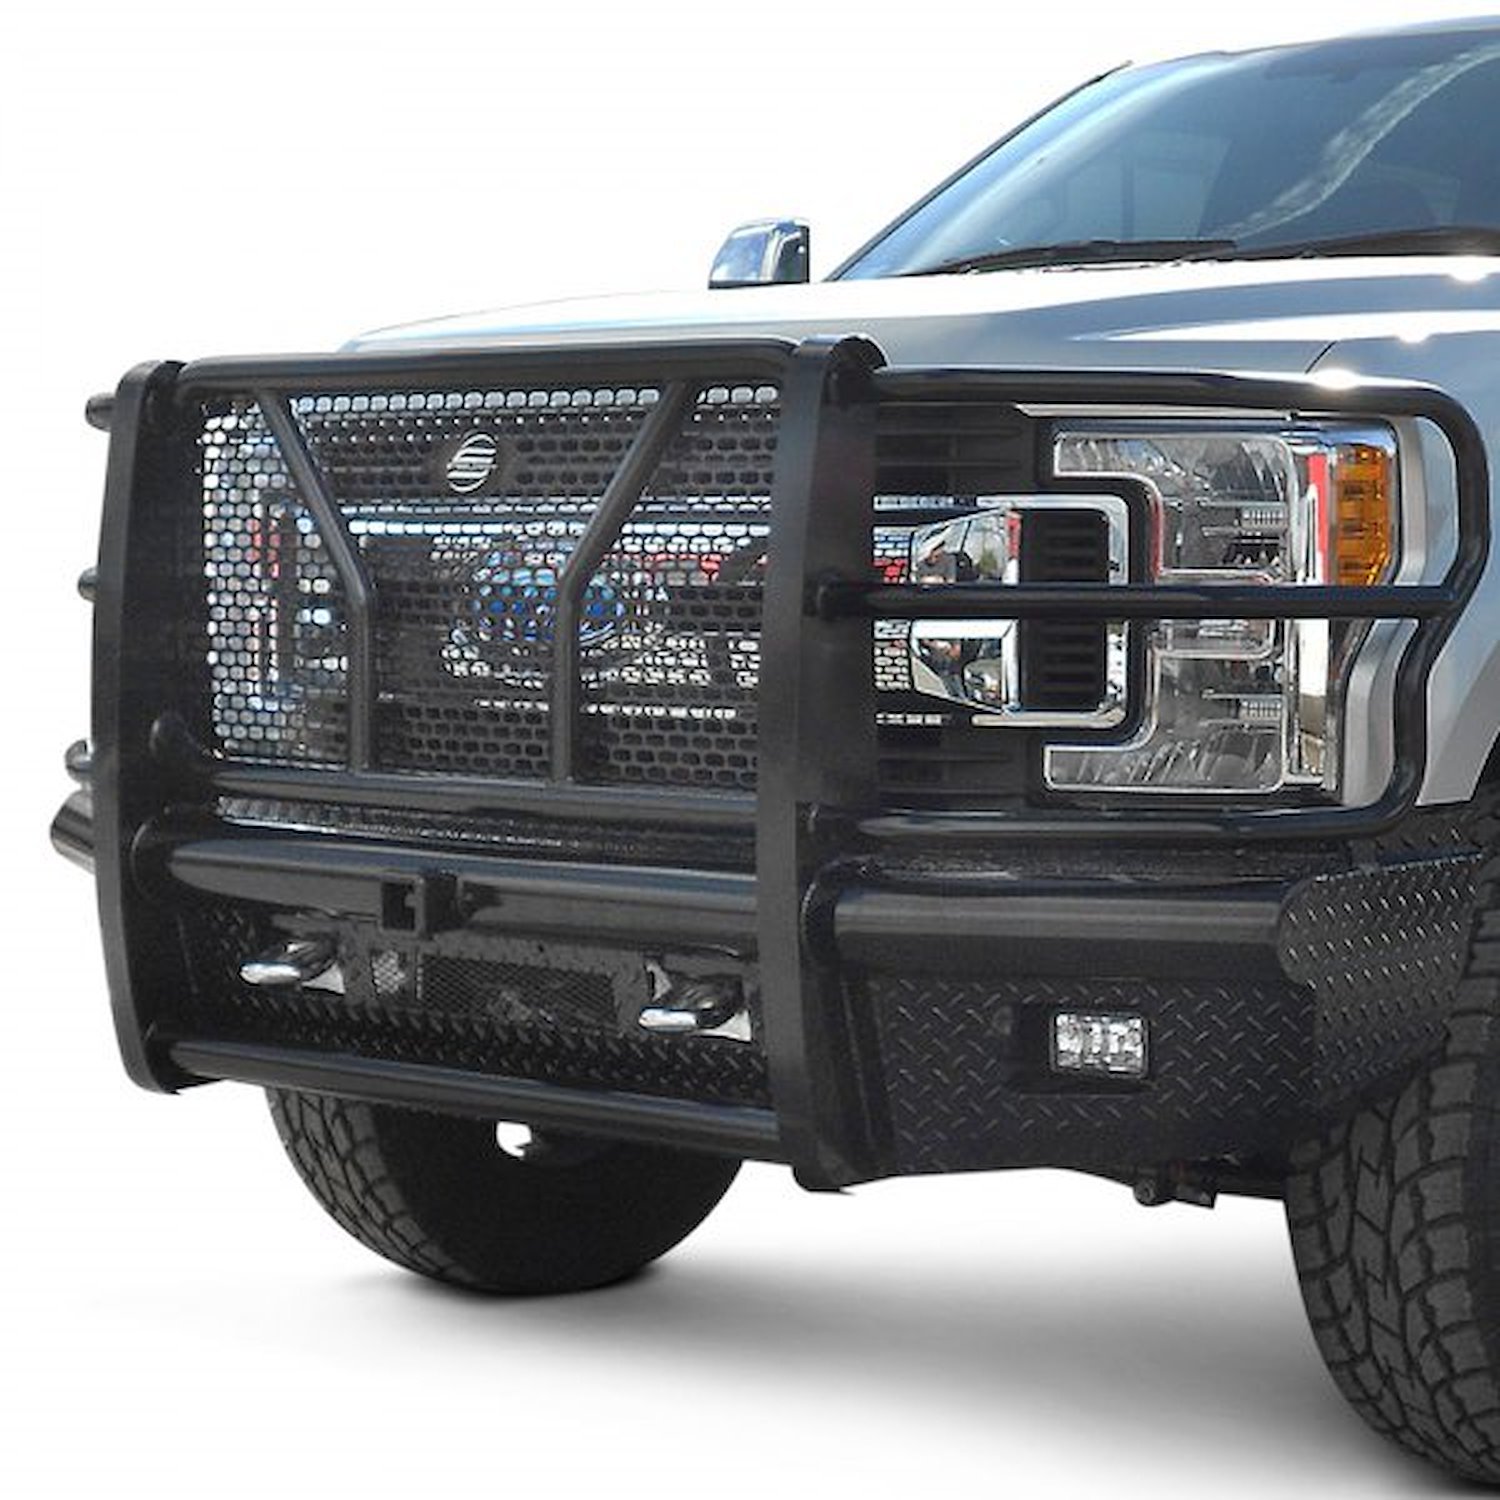 HD Front Bumper Black for 2010 Dodge Ram 2500/3500 and 2011-2017 Ram 2500/3500